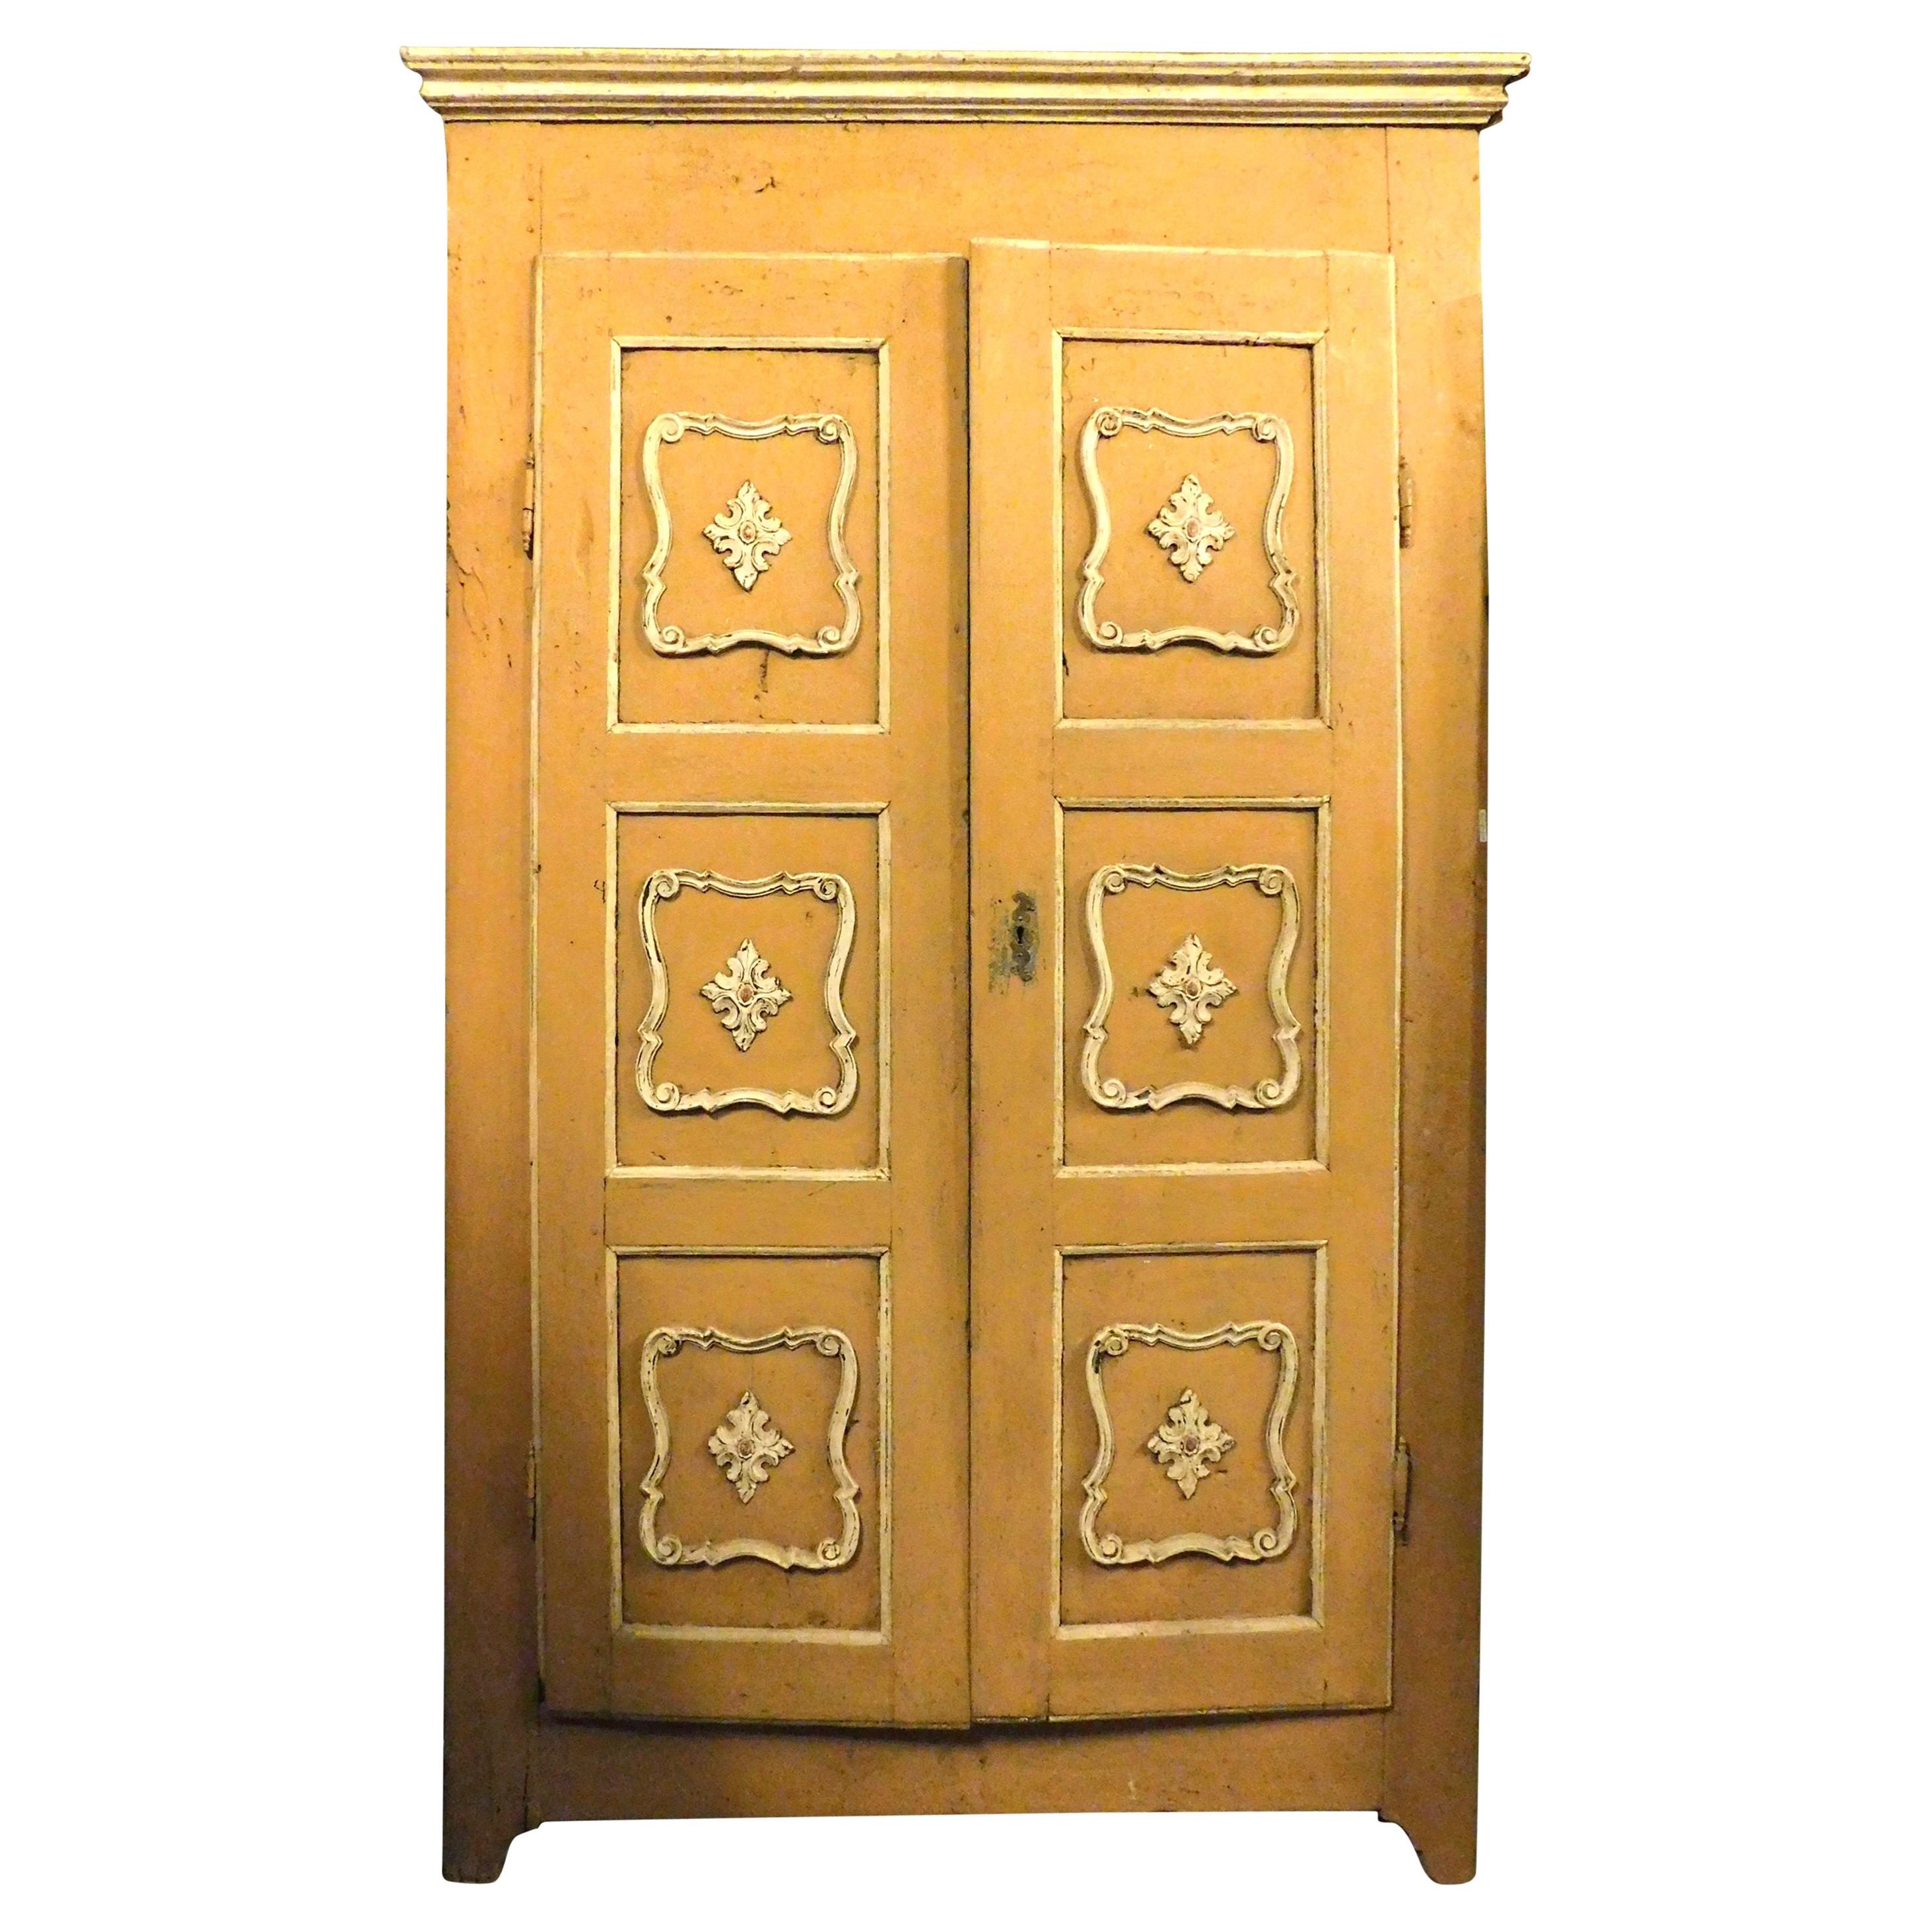 Antique Lacquered Wall Cabinet Double Doors, Yellow/White Cupboard, '800 Italy For Sale